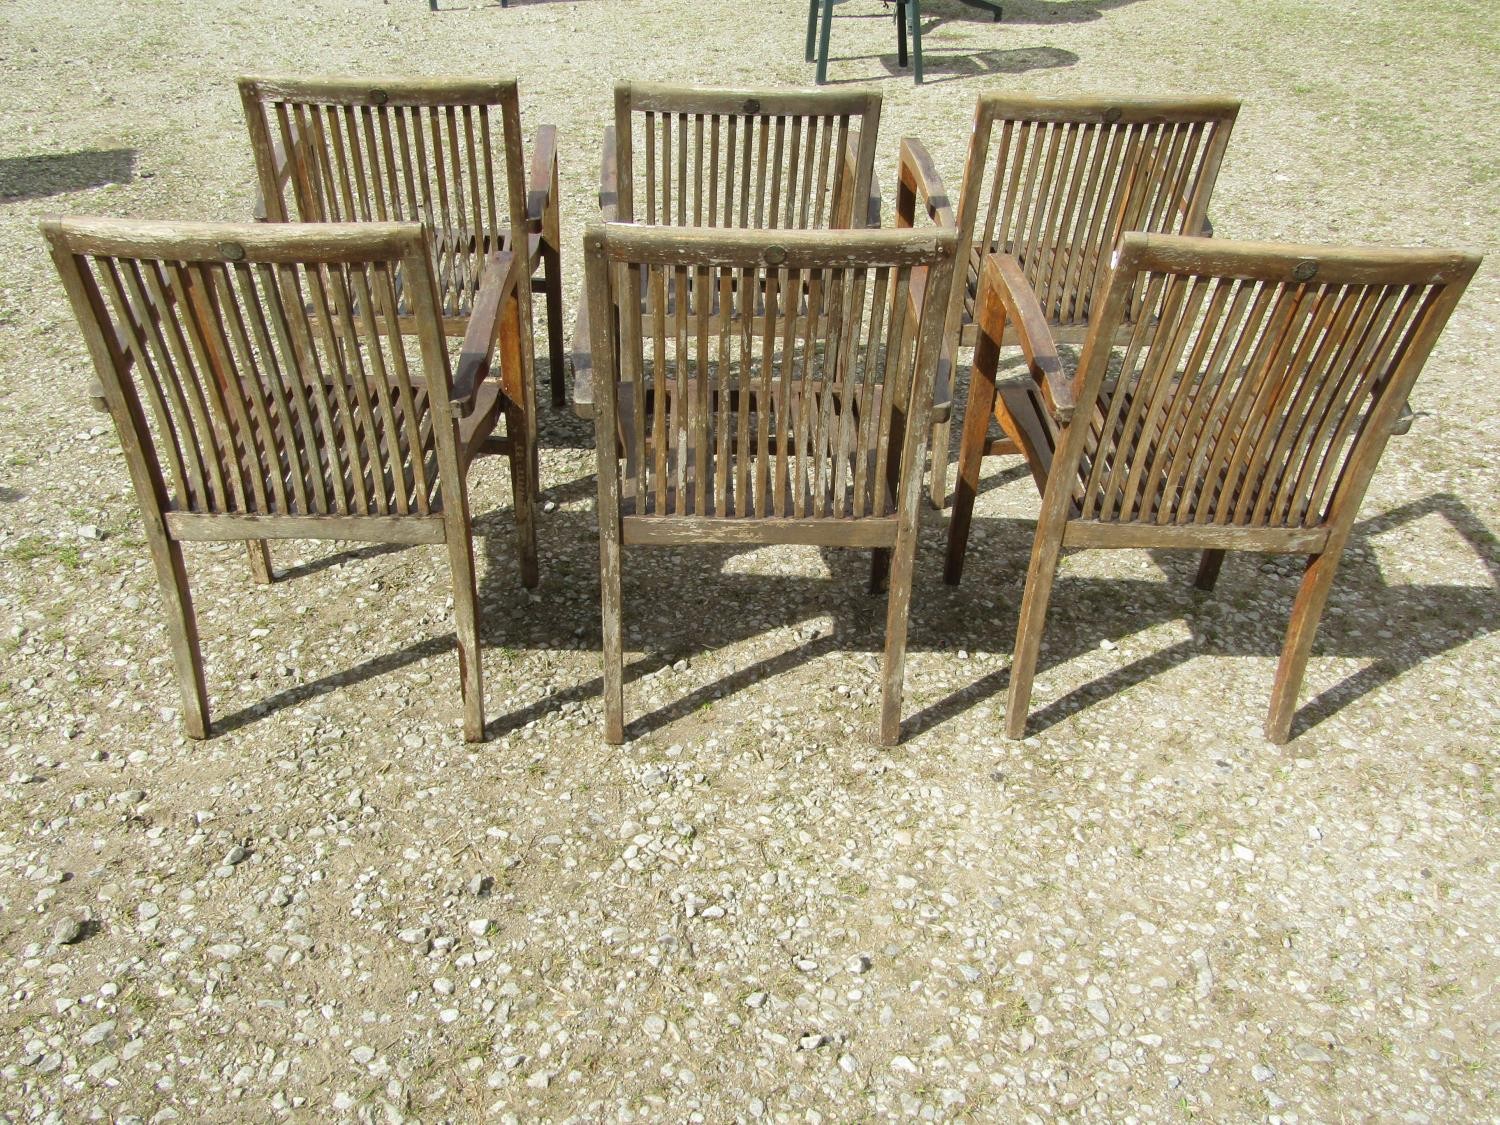 A set of six Nauteak good quality weathered stained teak garden open arm chairs with slender slatted - Image 3 of 4